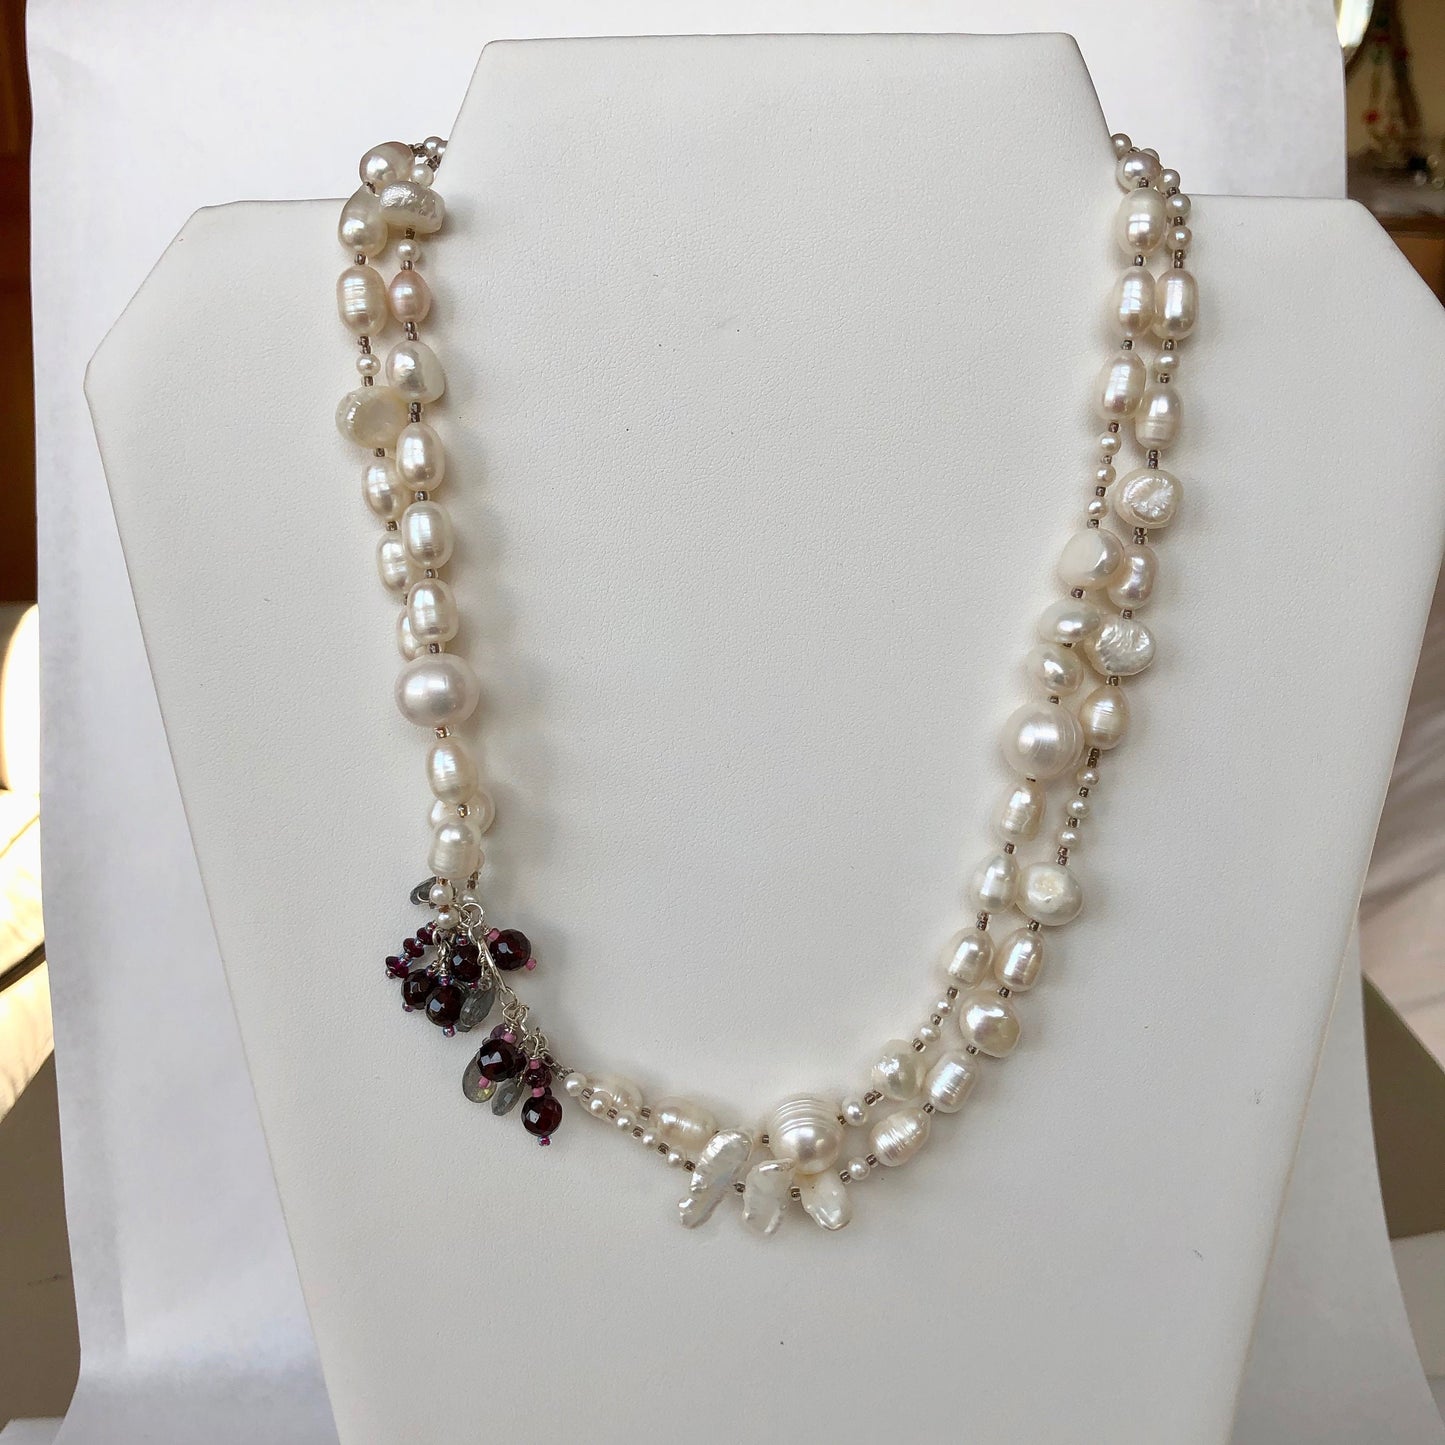 Pearls. Beautiful knotted fresh water pearl and garnet embellished necklace. The necklace is finished with a filigree gold clasp.